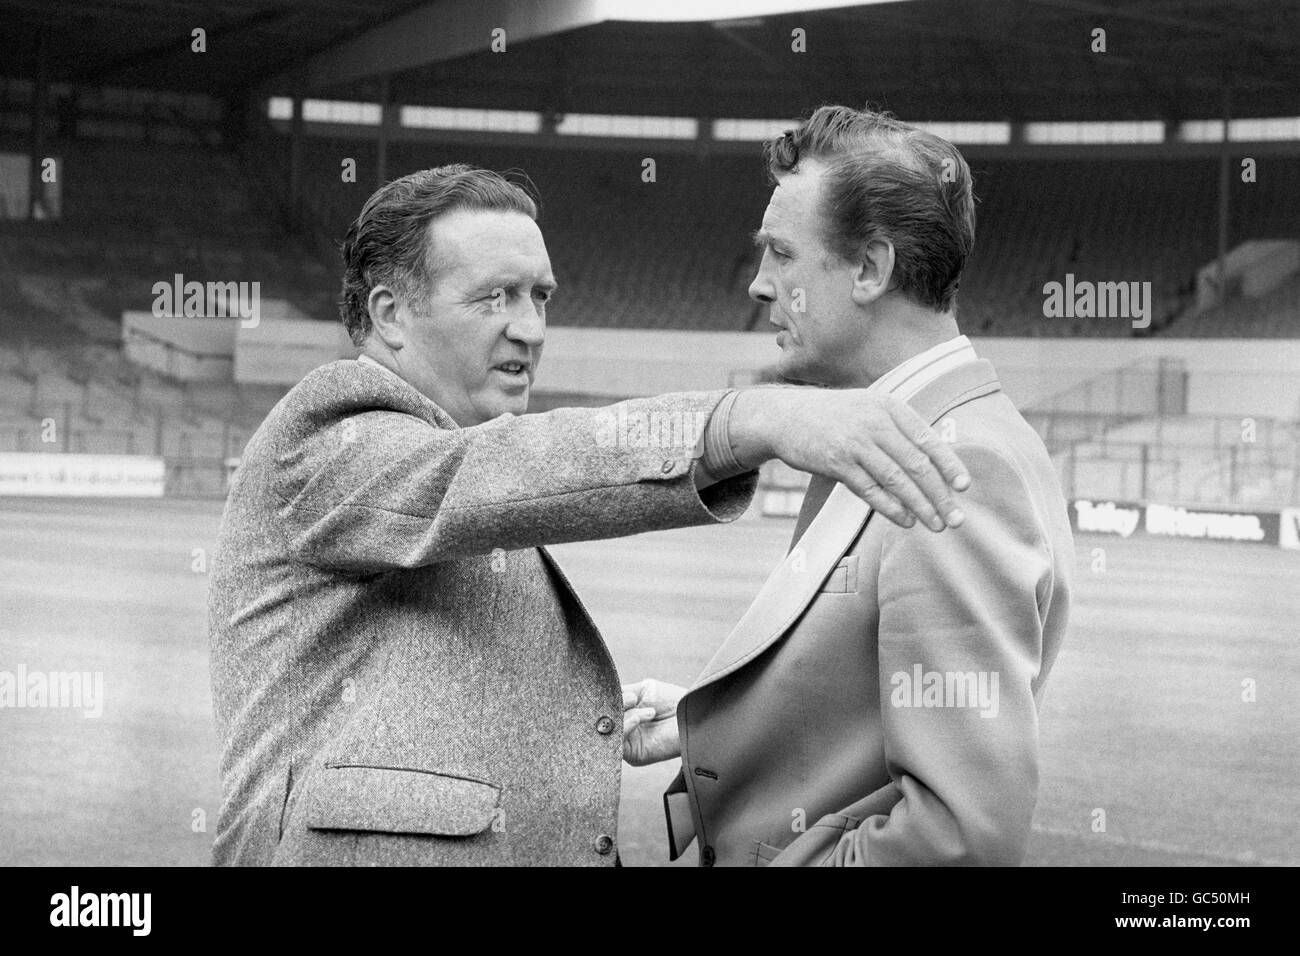 Former Celtic Manager Jock Stein (l) gets together with Leeds United caretaker Manager Maurice Lindlay (r) on the pitch at Elland Road. Jock Stein takes over from Jimmy Armfield as Leeds United Manager. Stock Photo